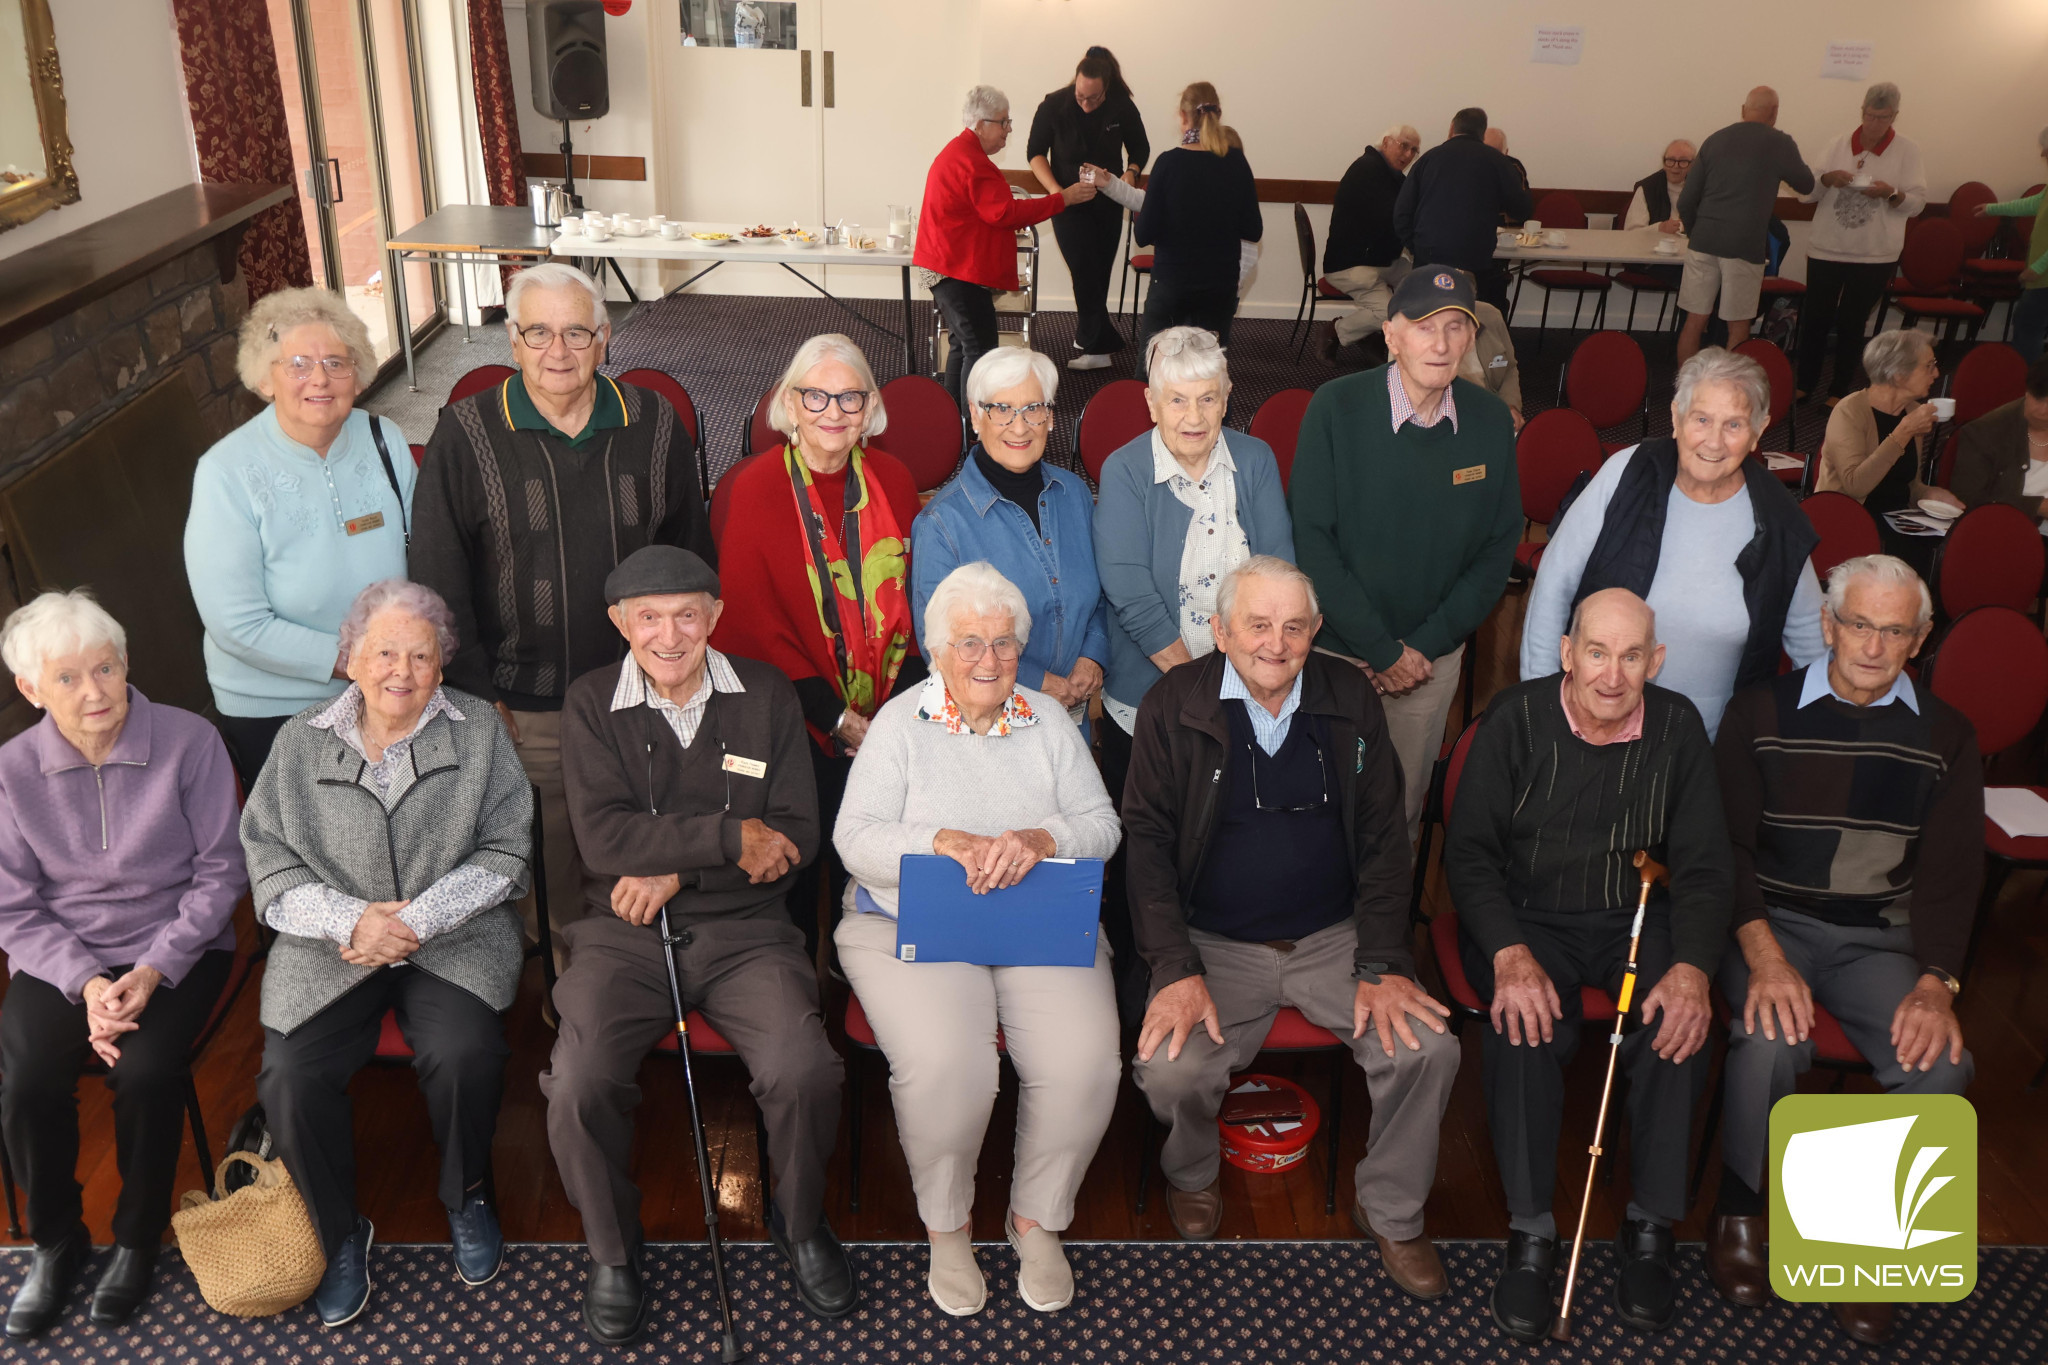 Congratulations: Terang and District Probus Club is preparing to celebrate 20 years since the club’s inception. Pictured are some of the founding members who remain with the club today.